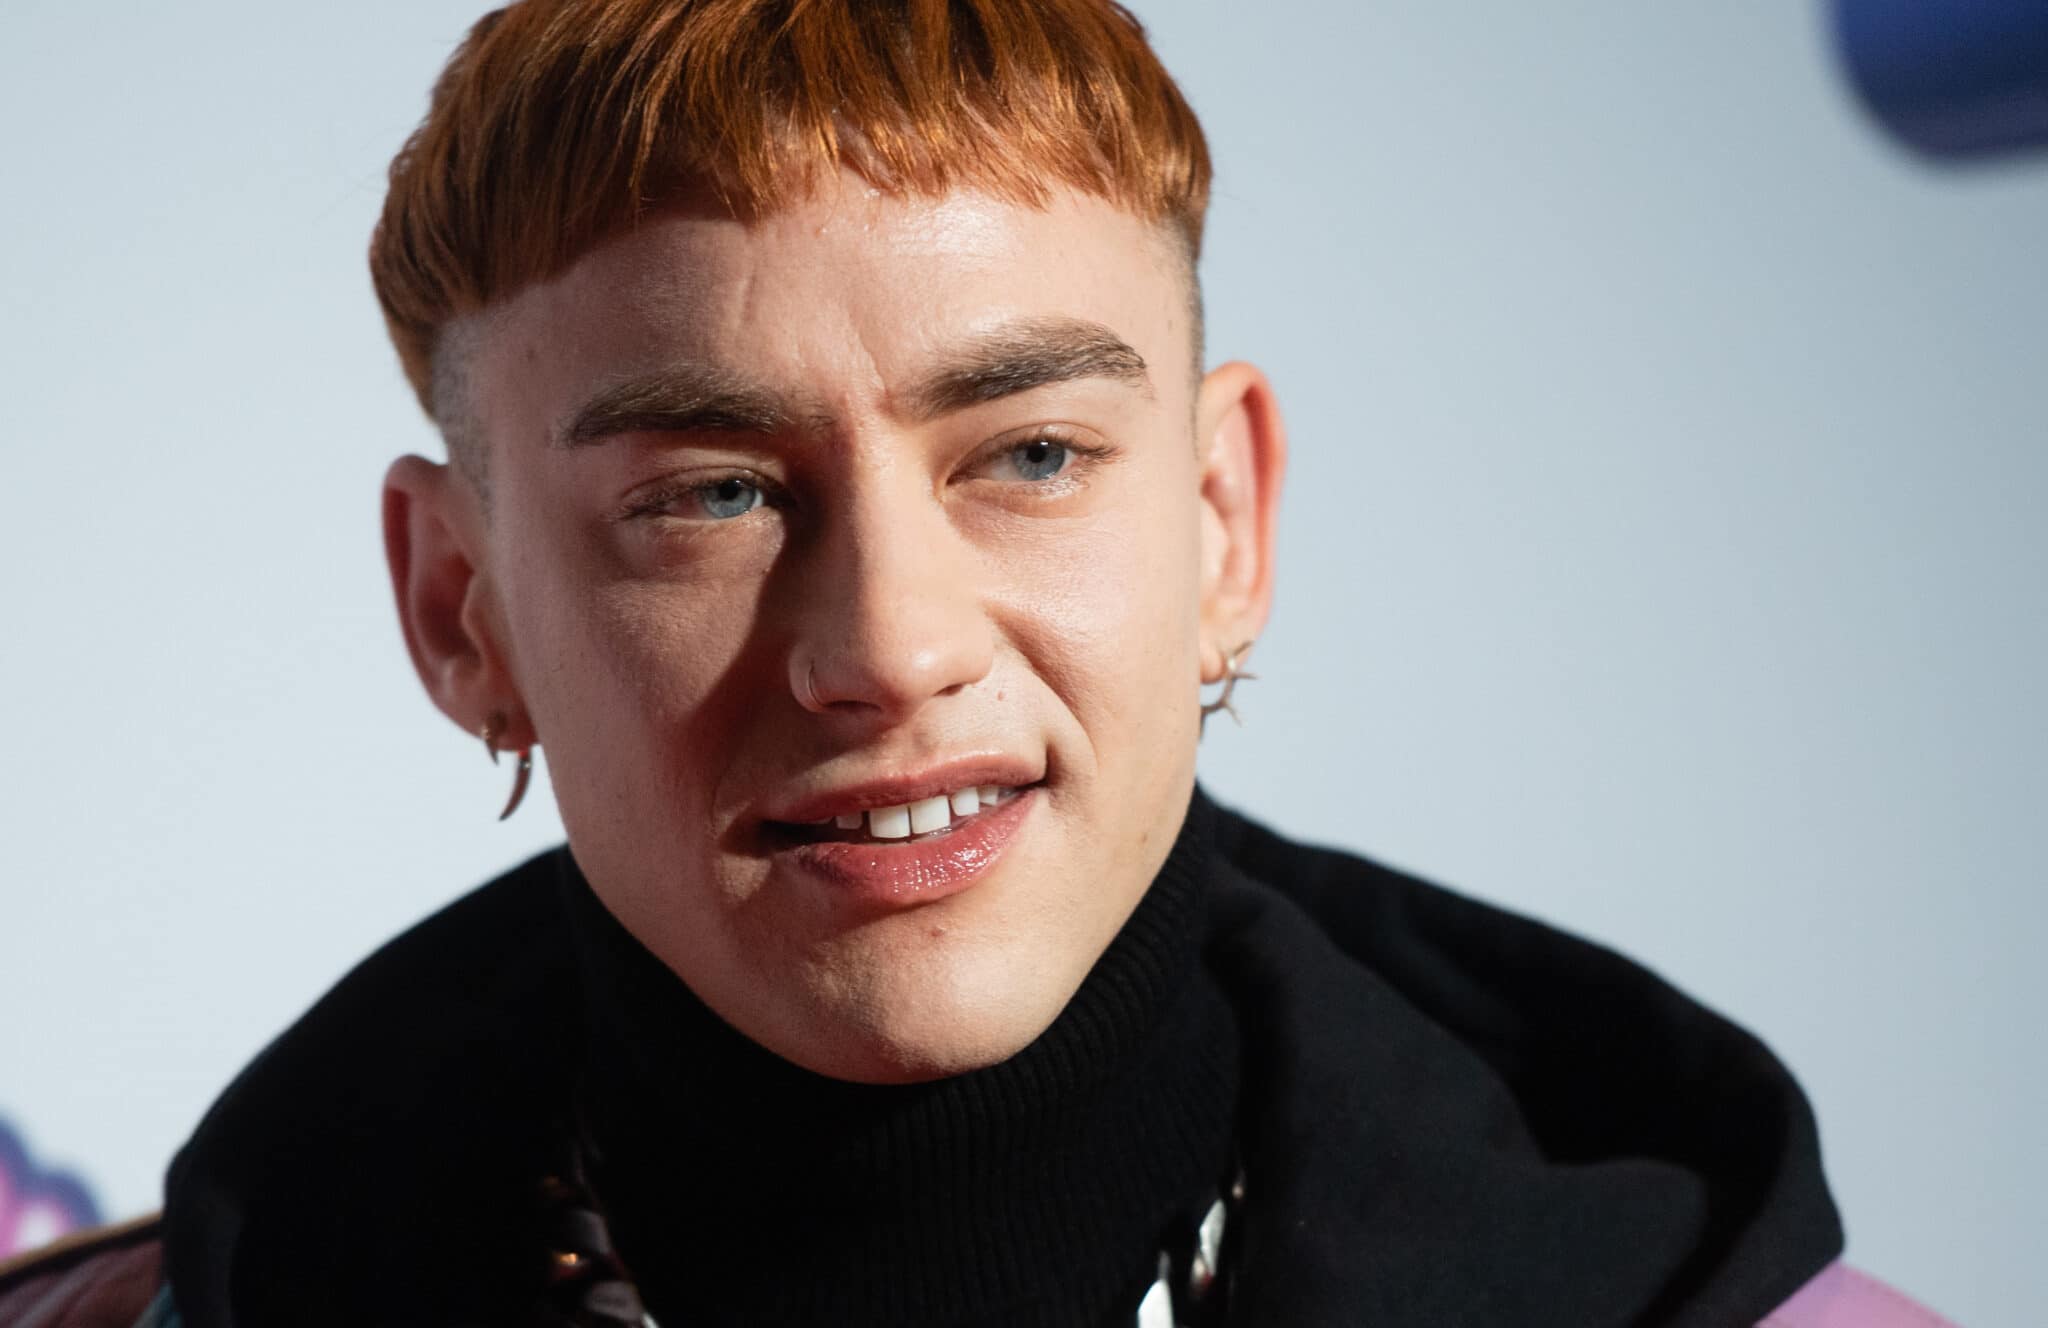 Olly Alexander finds top or bottom speculation 'surreal'